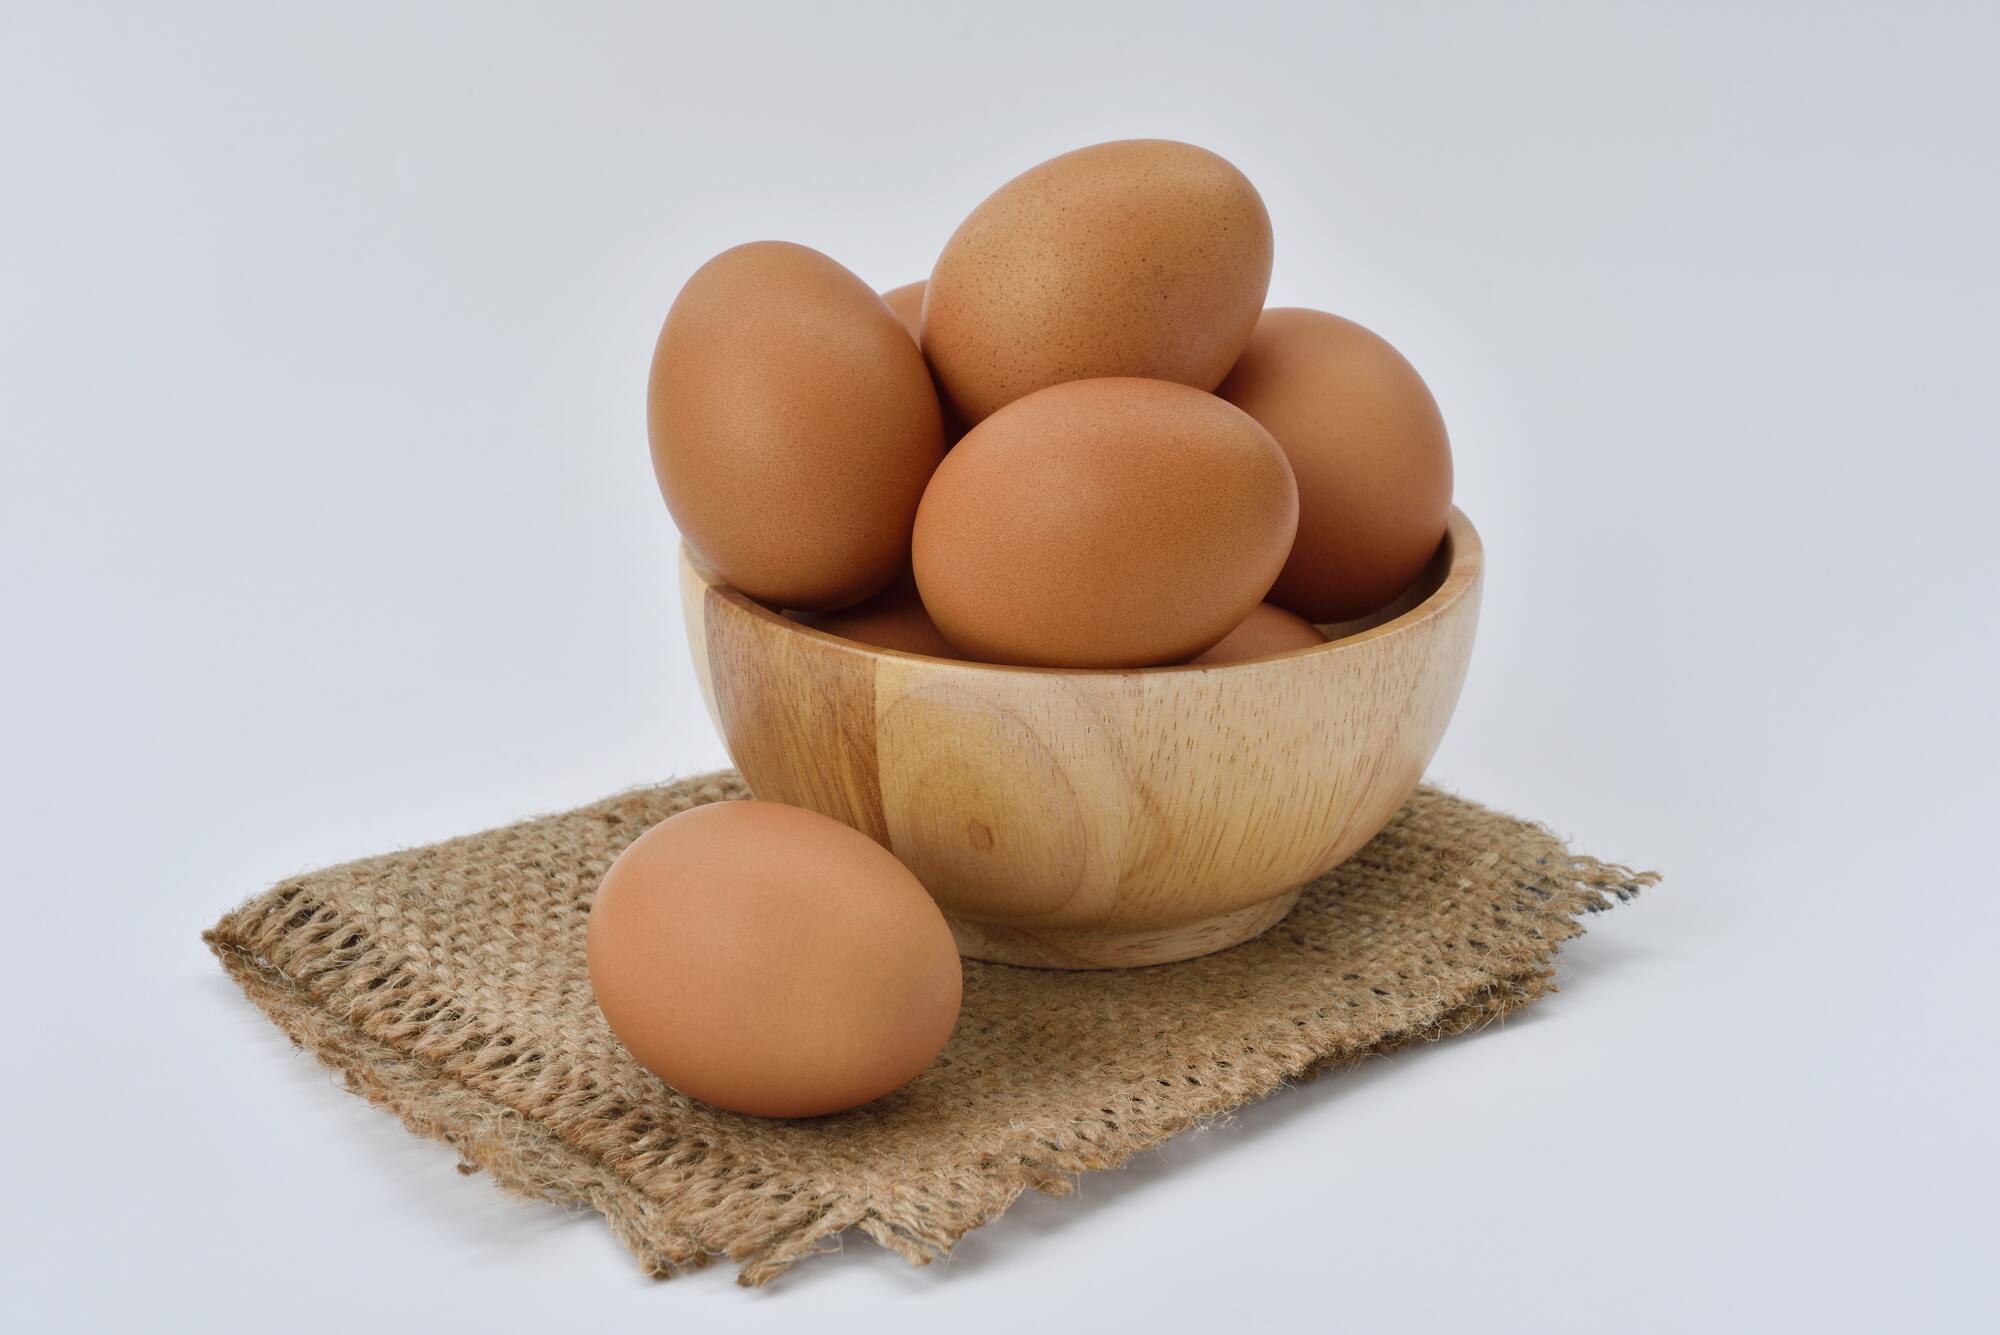 Eggs for making a casserole dish